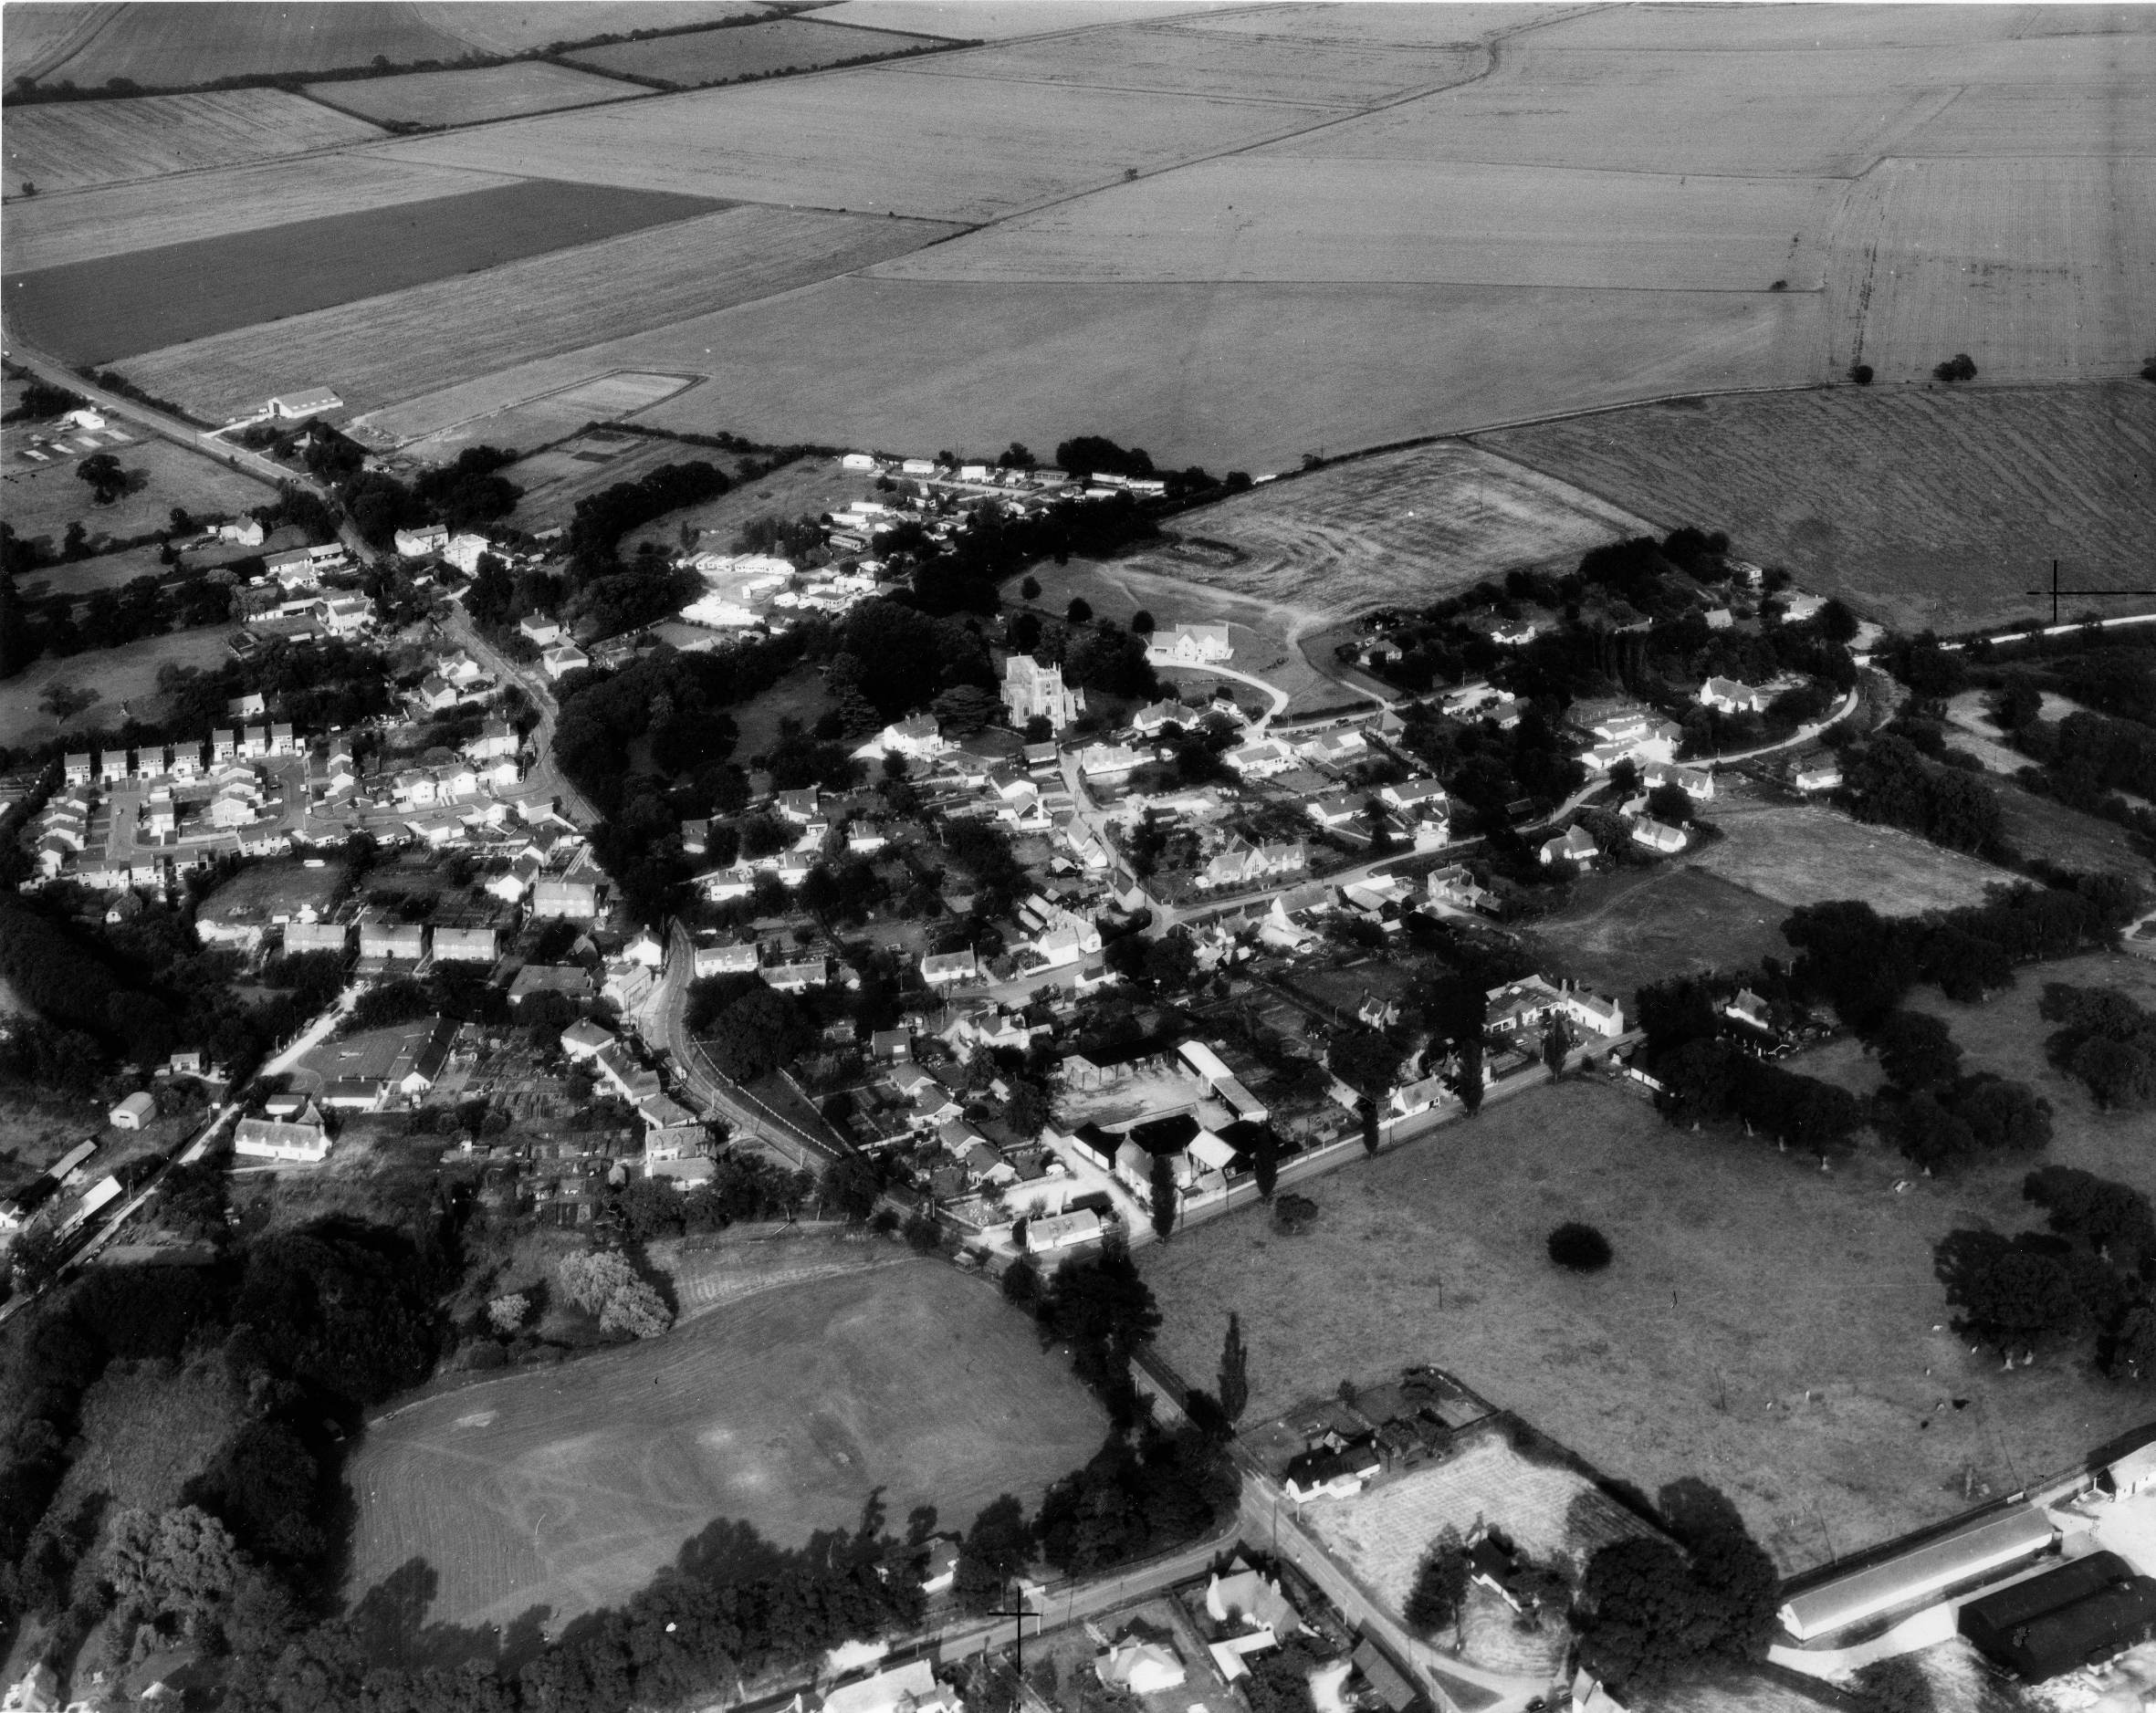 Elsworth from the air in 1971